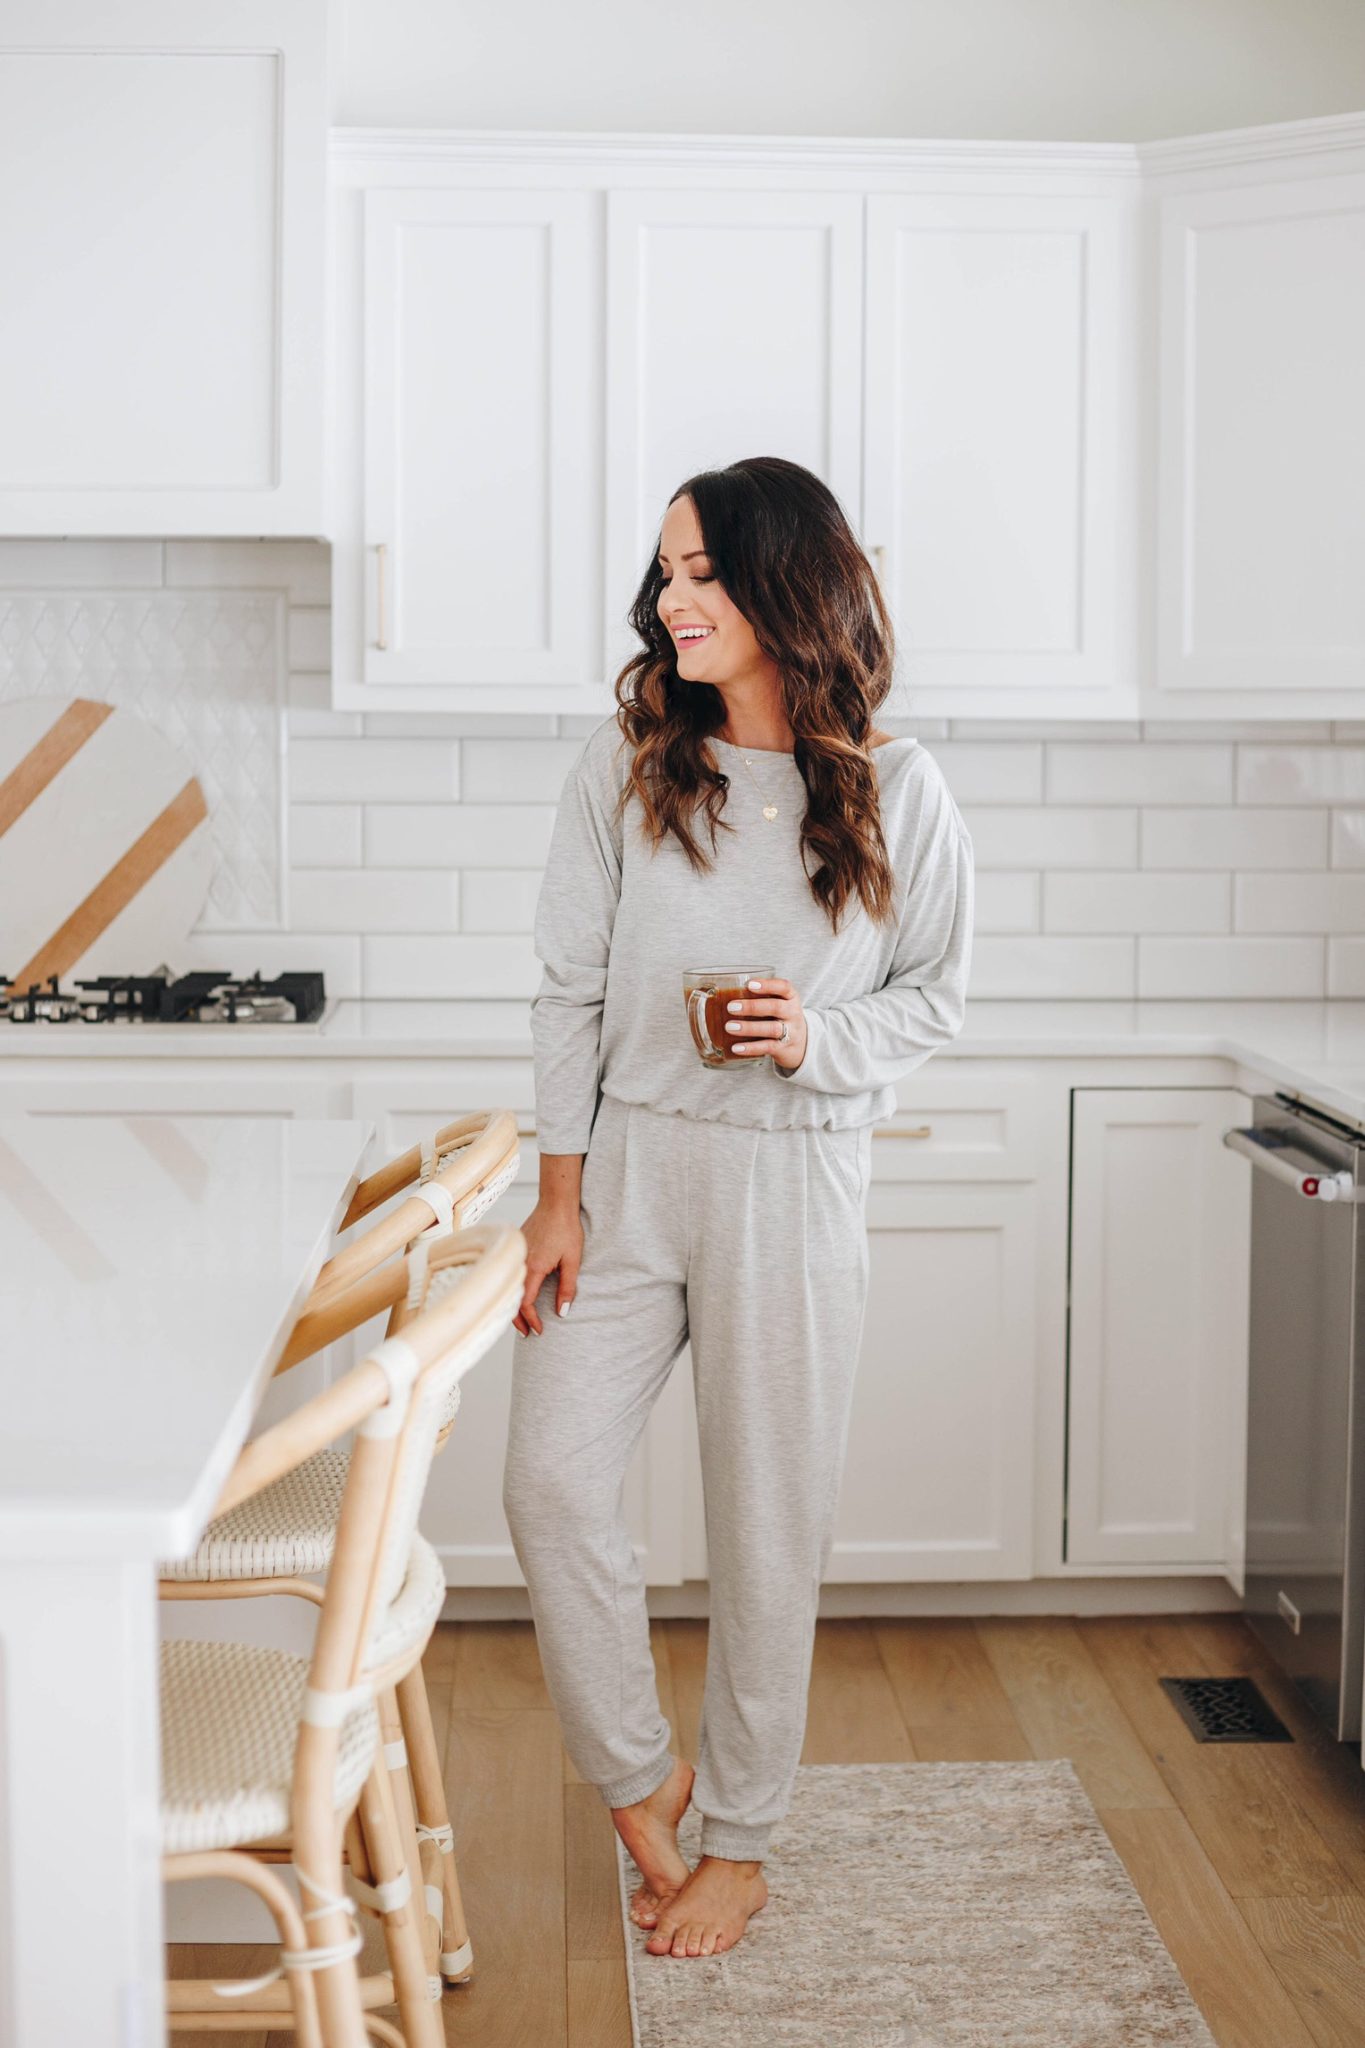 New Luxe Loungewear + Express 40-60% Off Sale! - The Double Take Girls